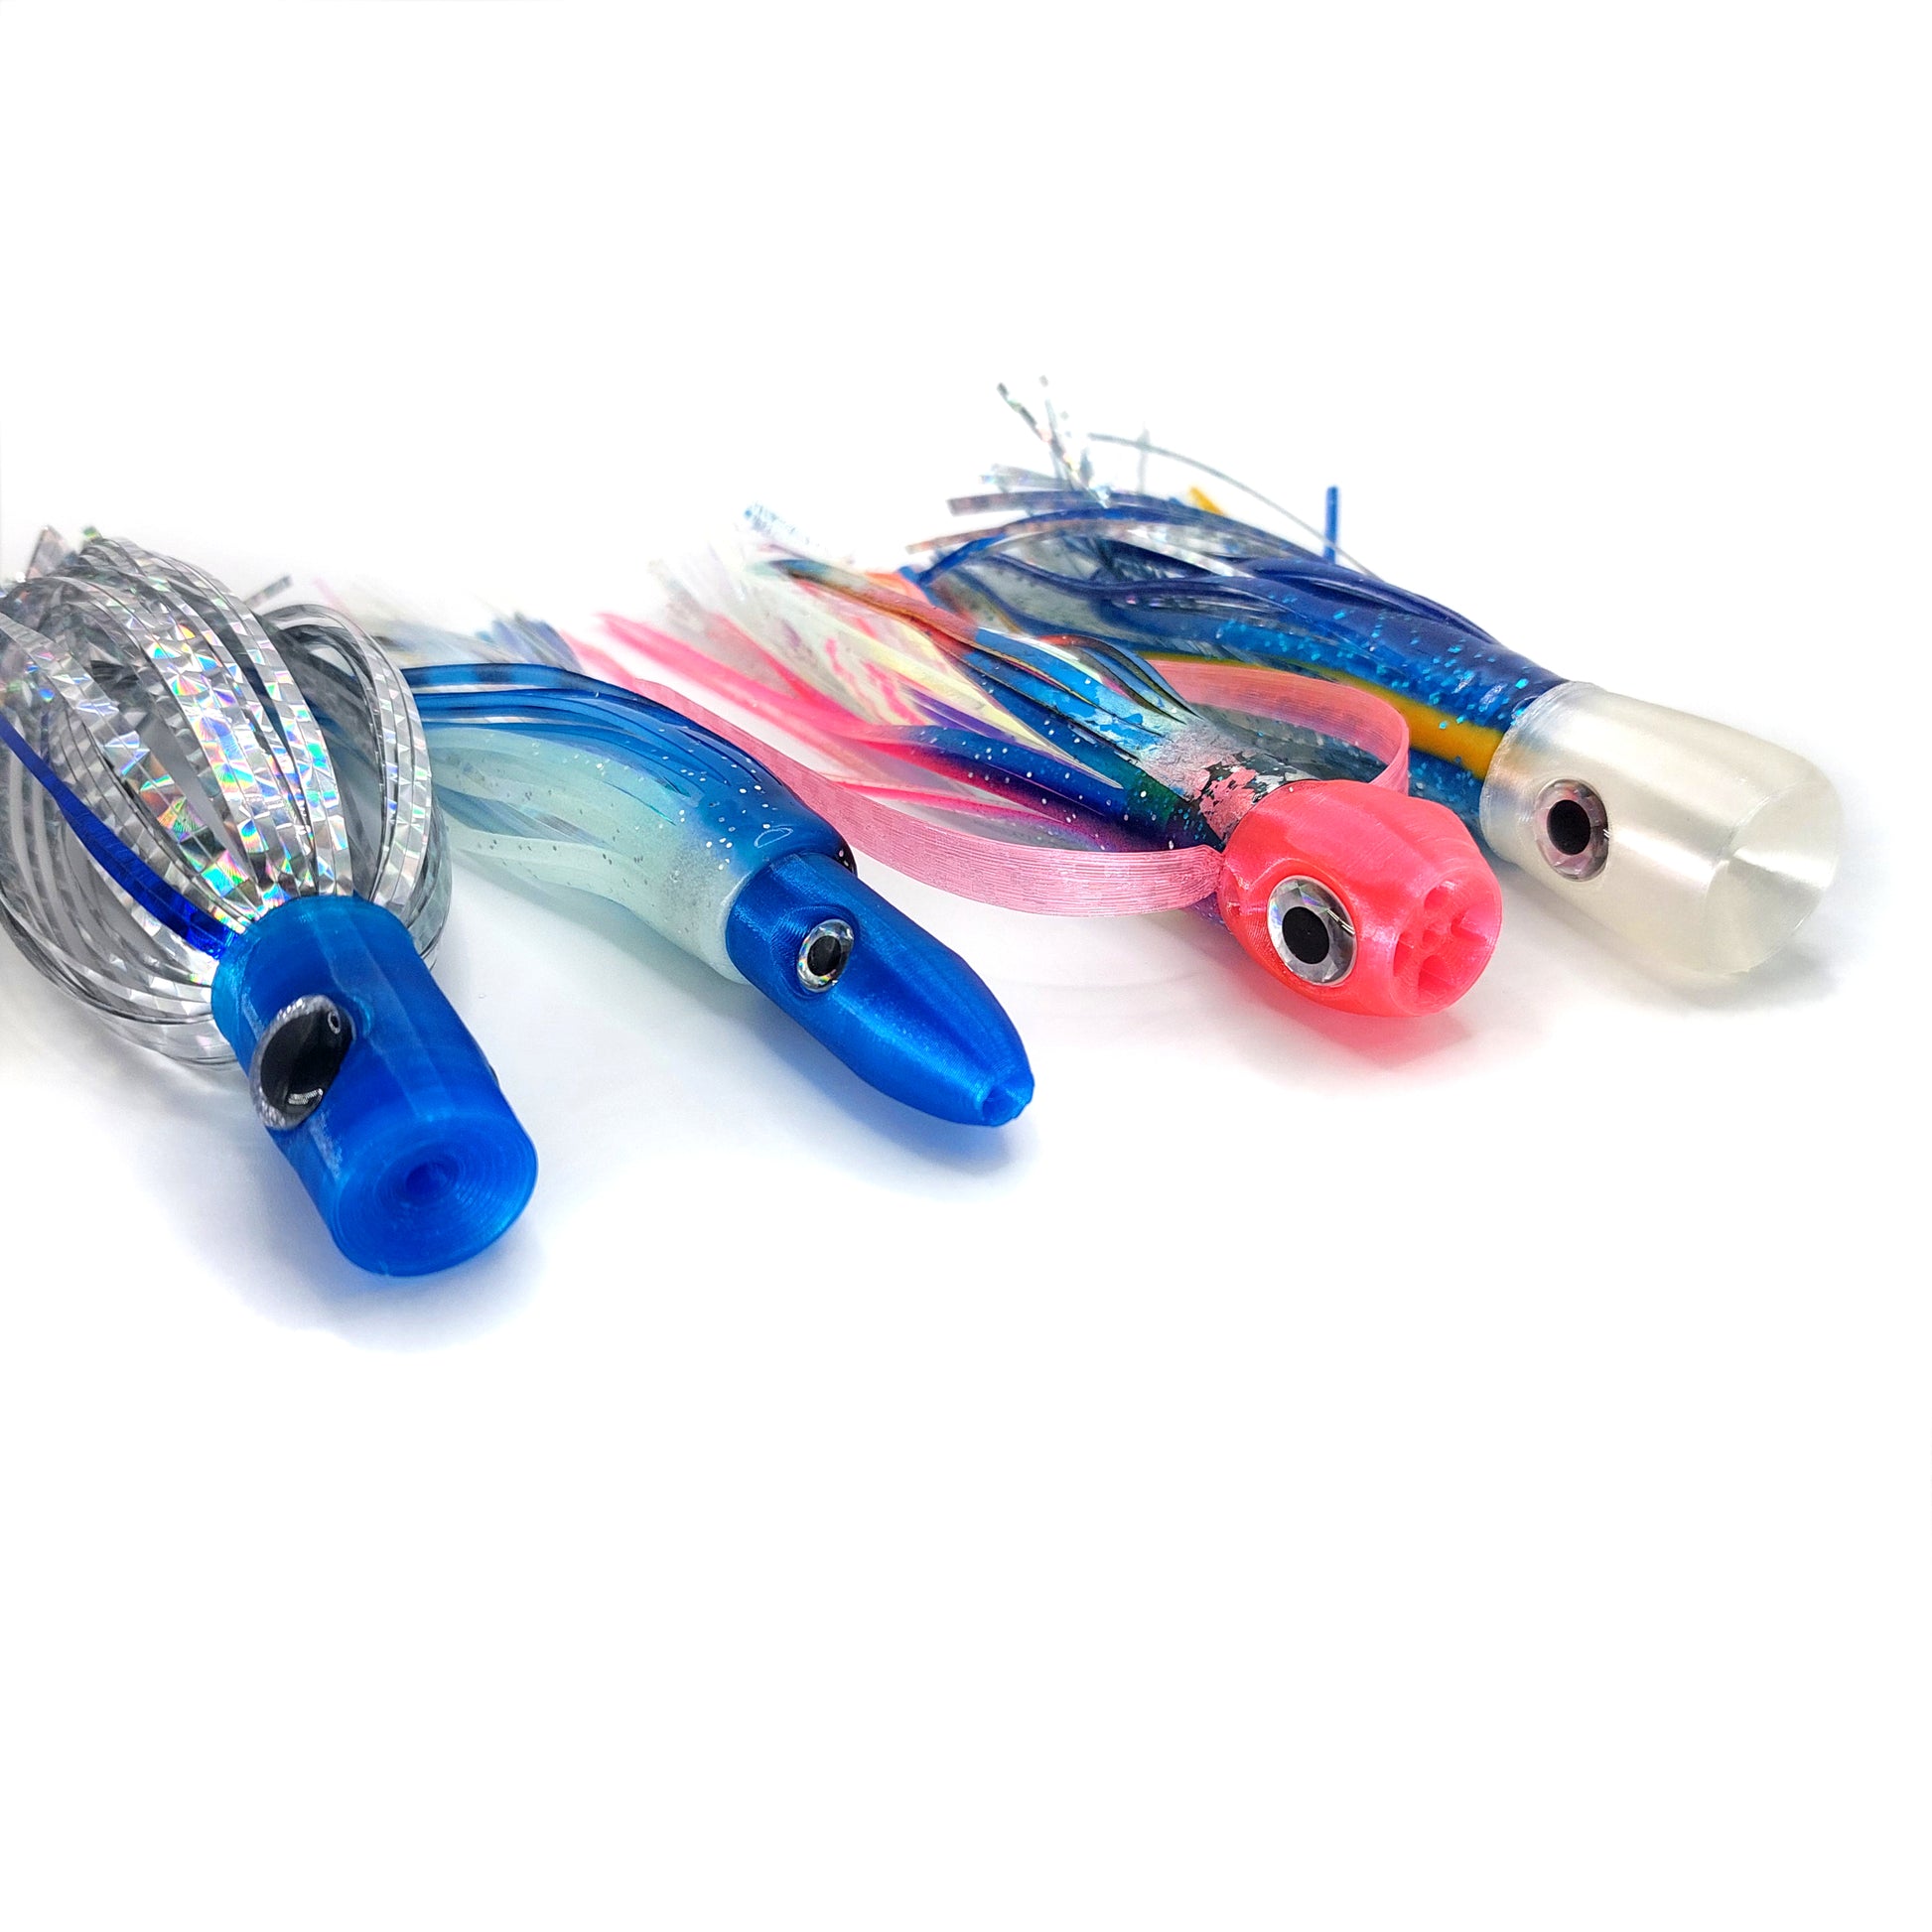 Mixed Offshore Trolling Lures Unrigged - Evolution Lures